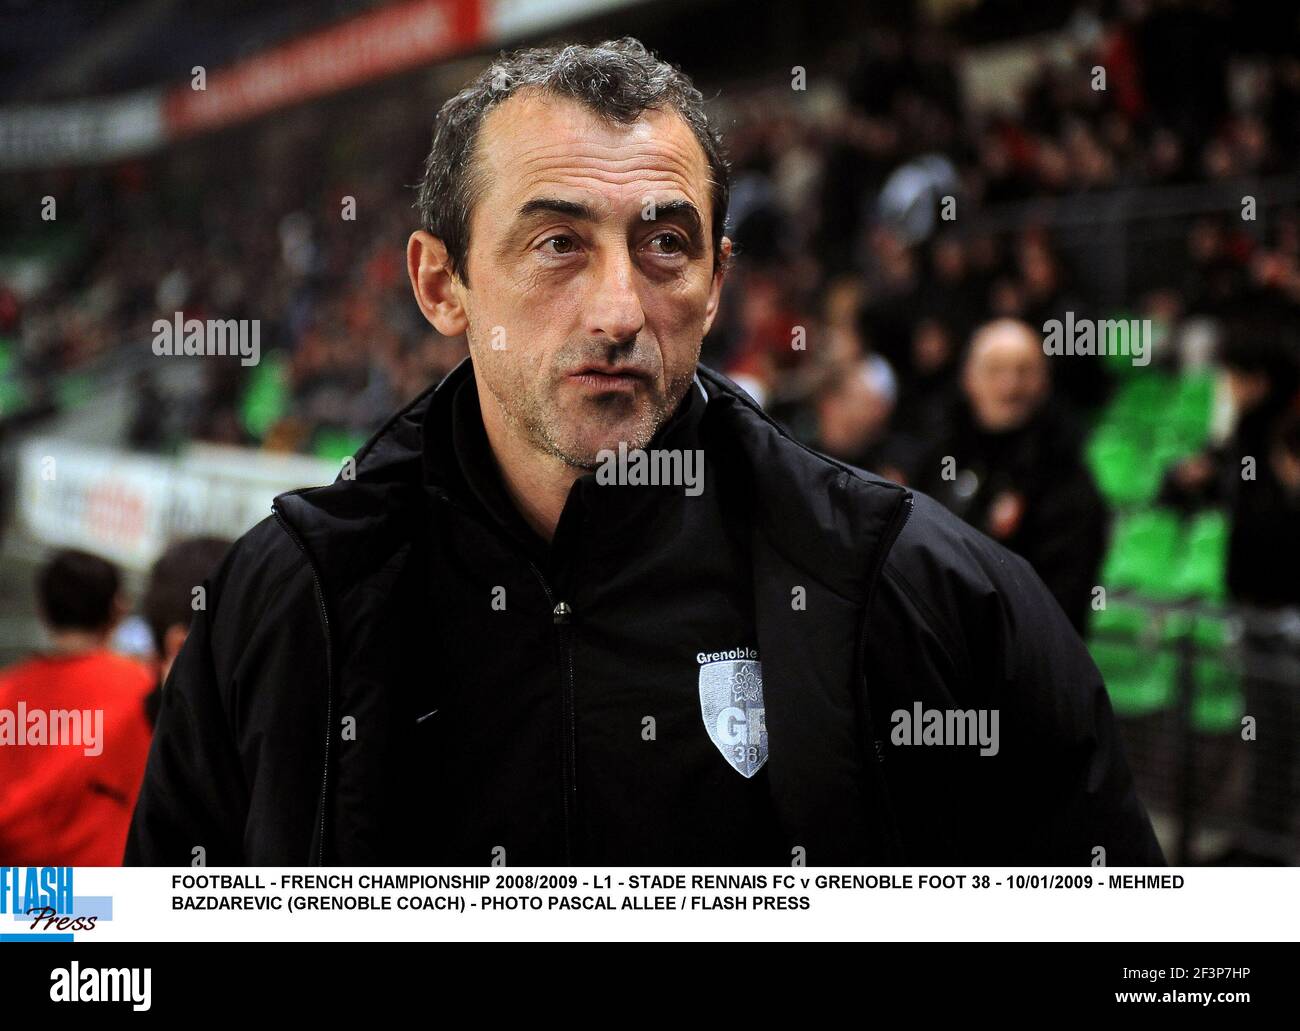 FOOTBALL - FRENCH CHAMPIONSHIP 2008/2009 - L1 - STADE RENNAIS FC v GRENOBLE  FOOT 38 - 10/01/2009 - MEHMED BAZDAREVIC (GRENOBLE COACH) - PHOTO PASCAL  ALLEE / FLASH PRESS Stock Photo - Alamy